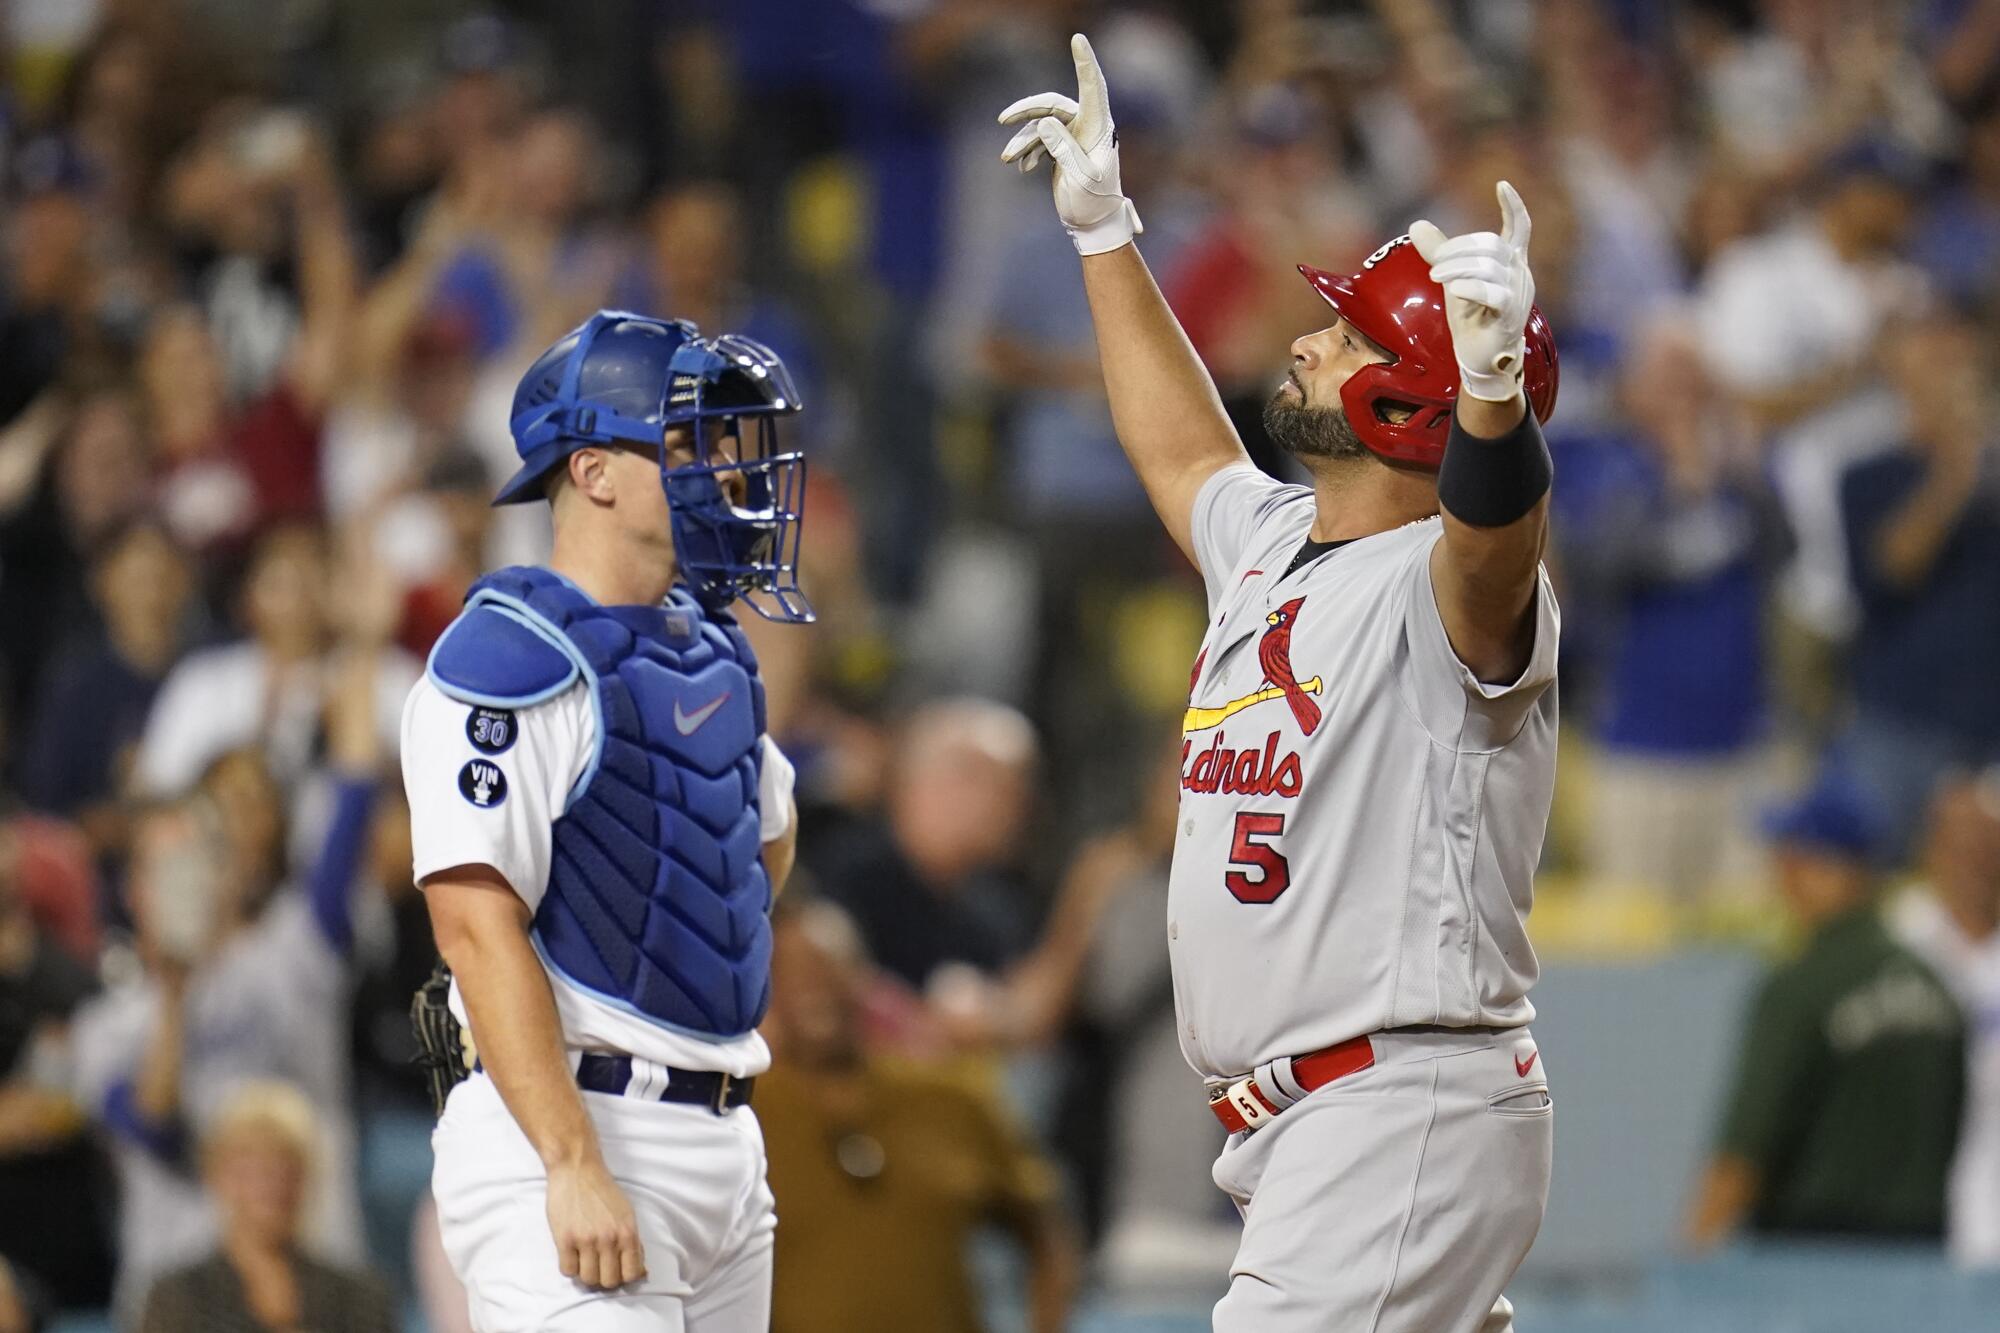 Albert Pujols chases 700 career home runs: Will Cardinals legend join  baseball's exclusive 700 HR club?